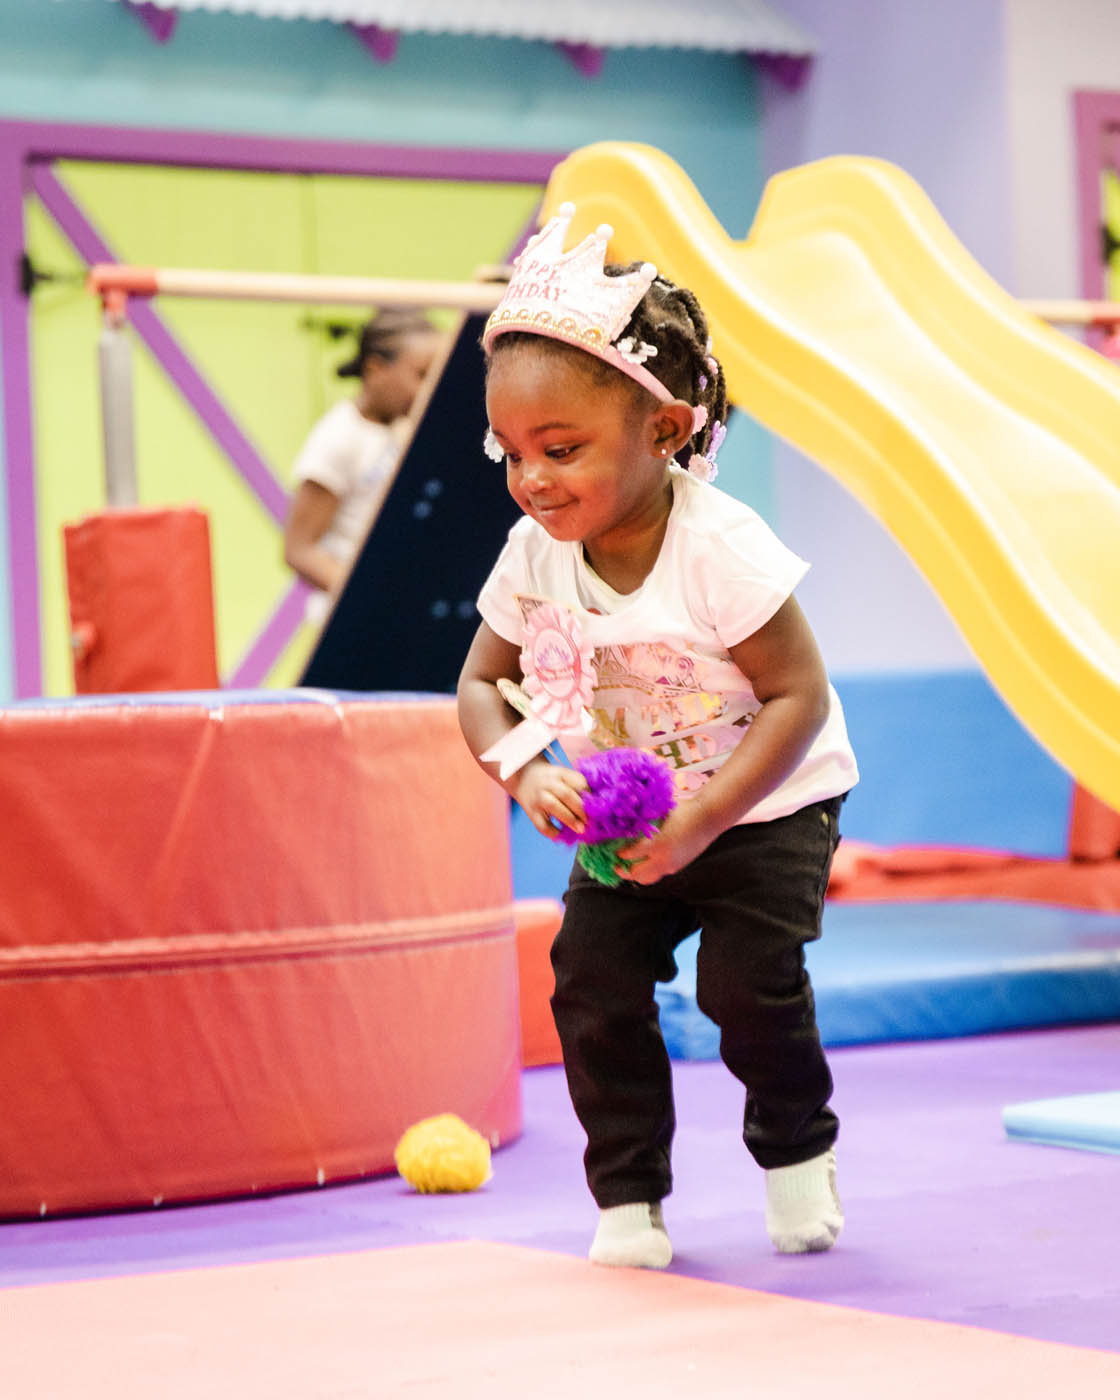 A little girl enjoying her b day party at Romp n' Roll Willow Grove kids birthday party places.